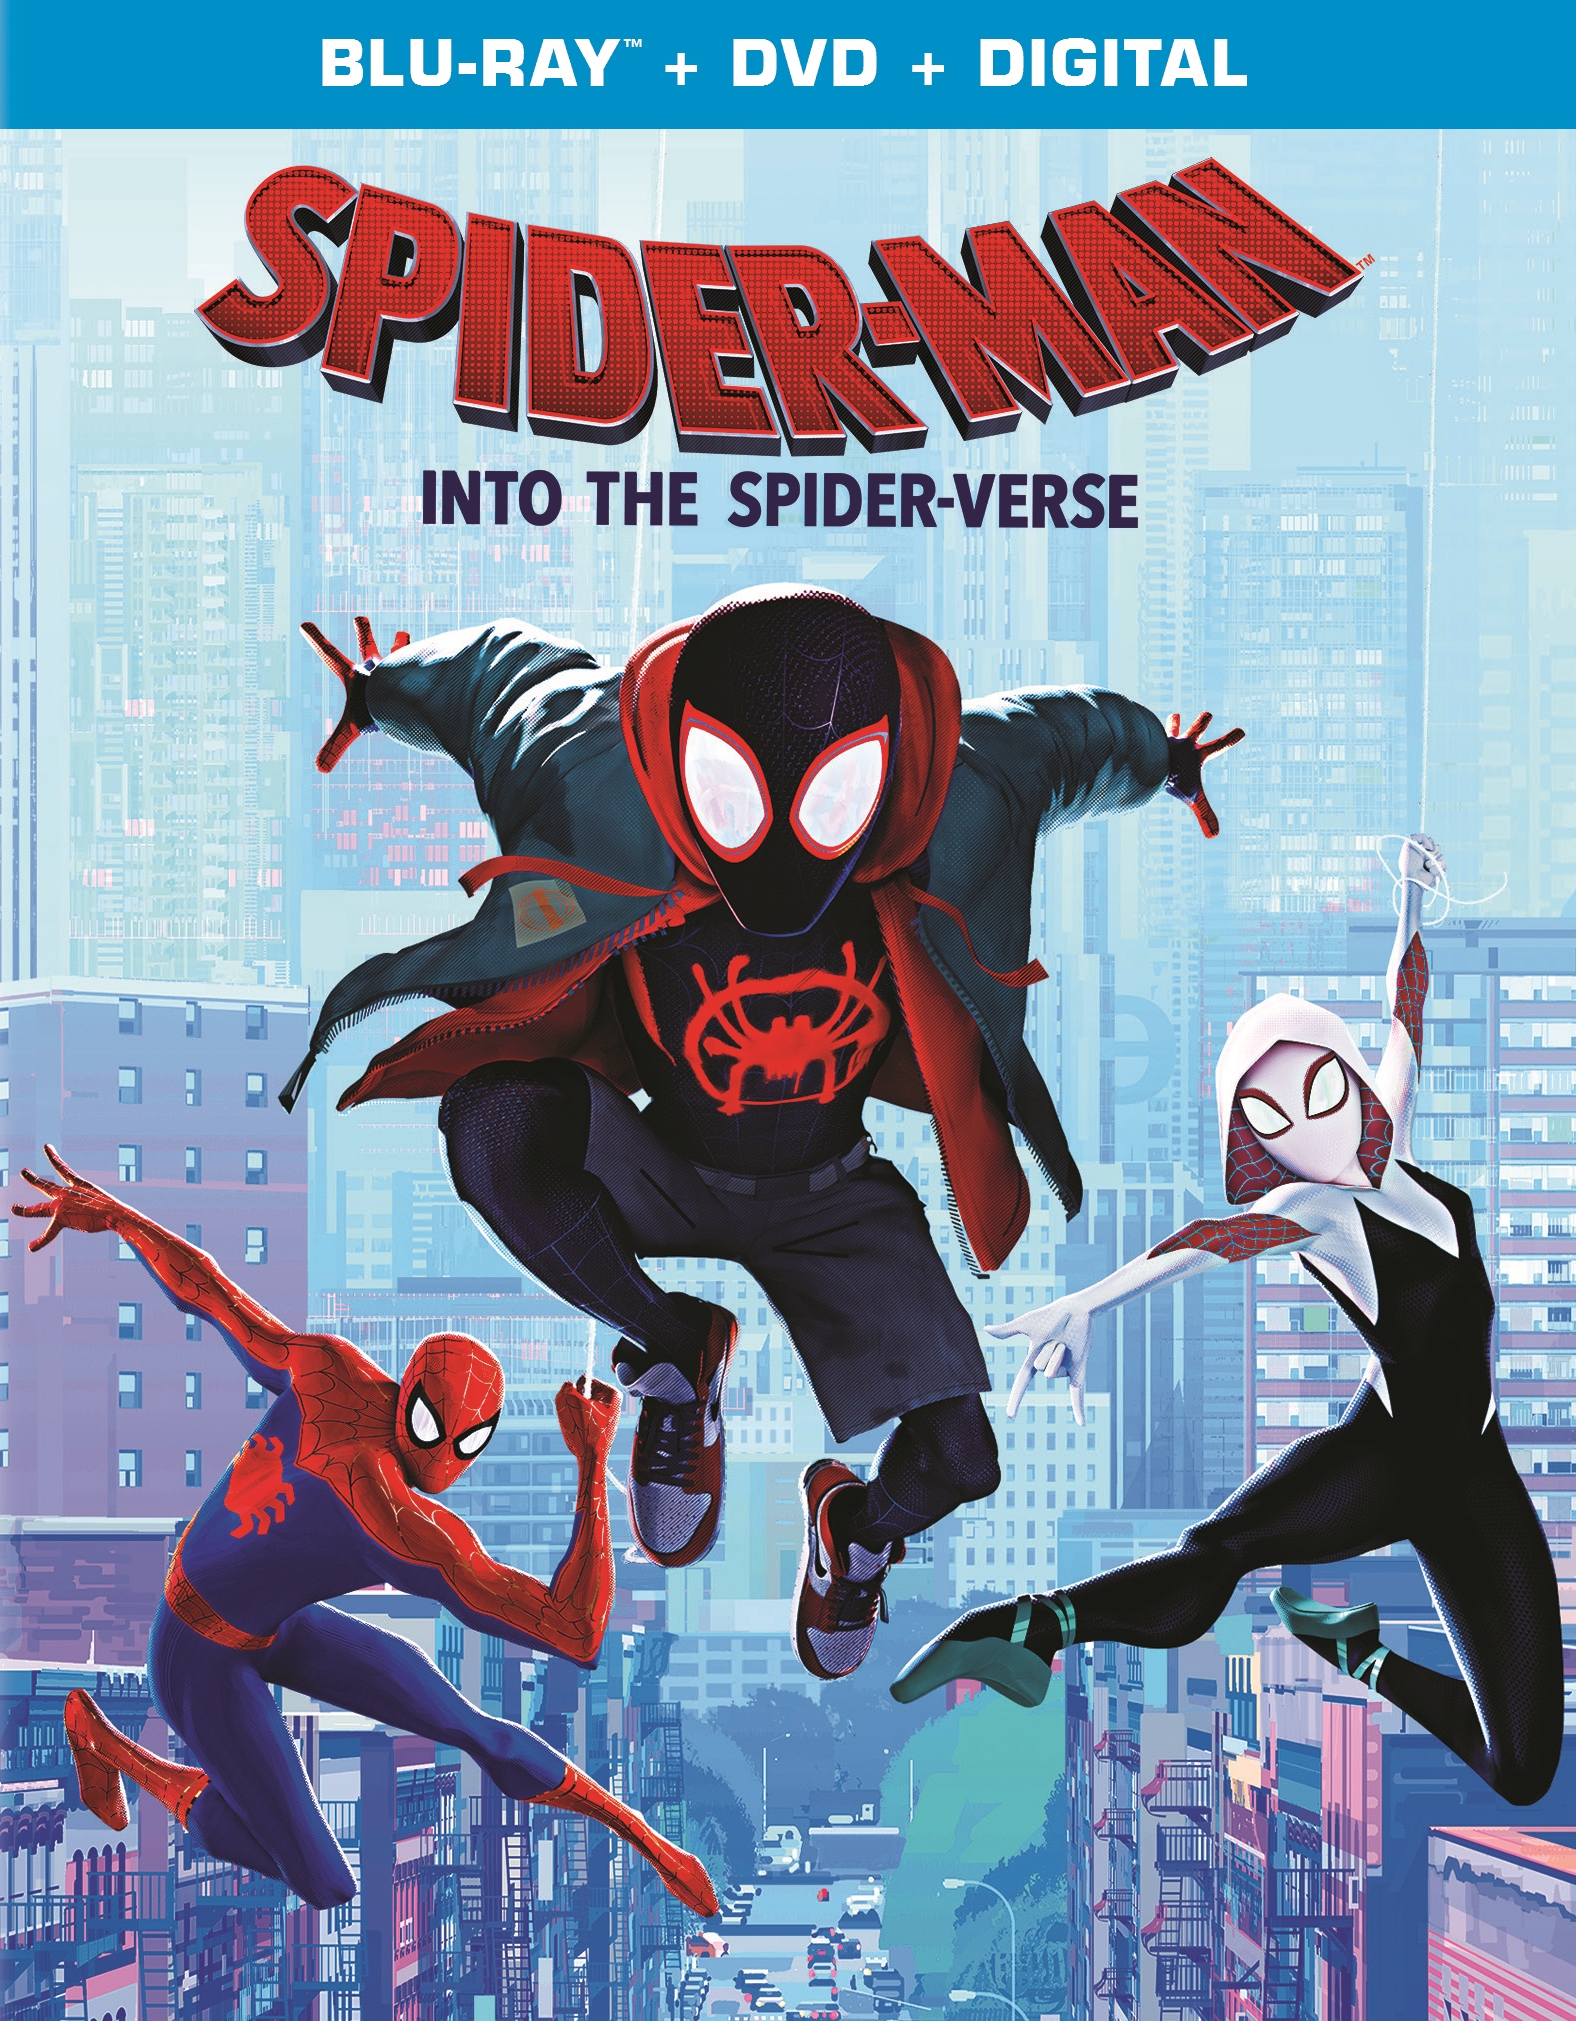 Spider-Man: Into the Spider-Verse [Includes Digital Copy] [Blu-ray/DVD]  [2018] - Best Buy